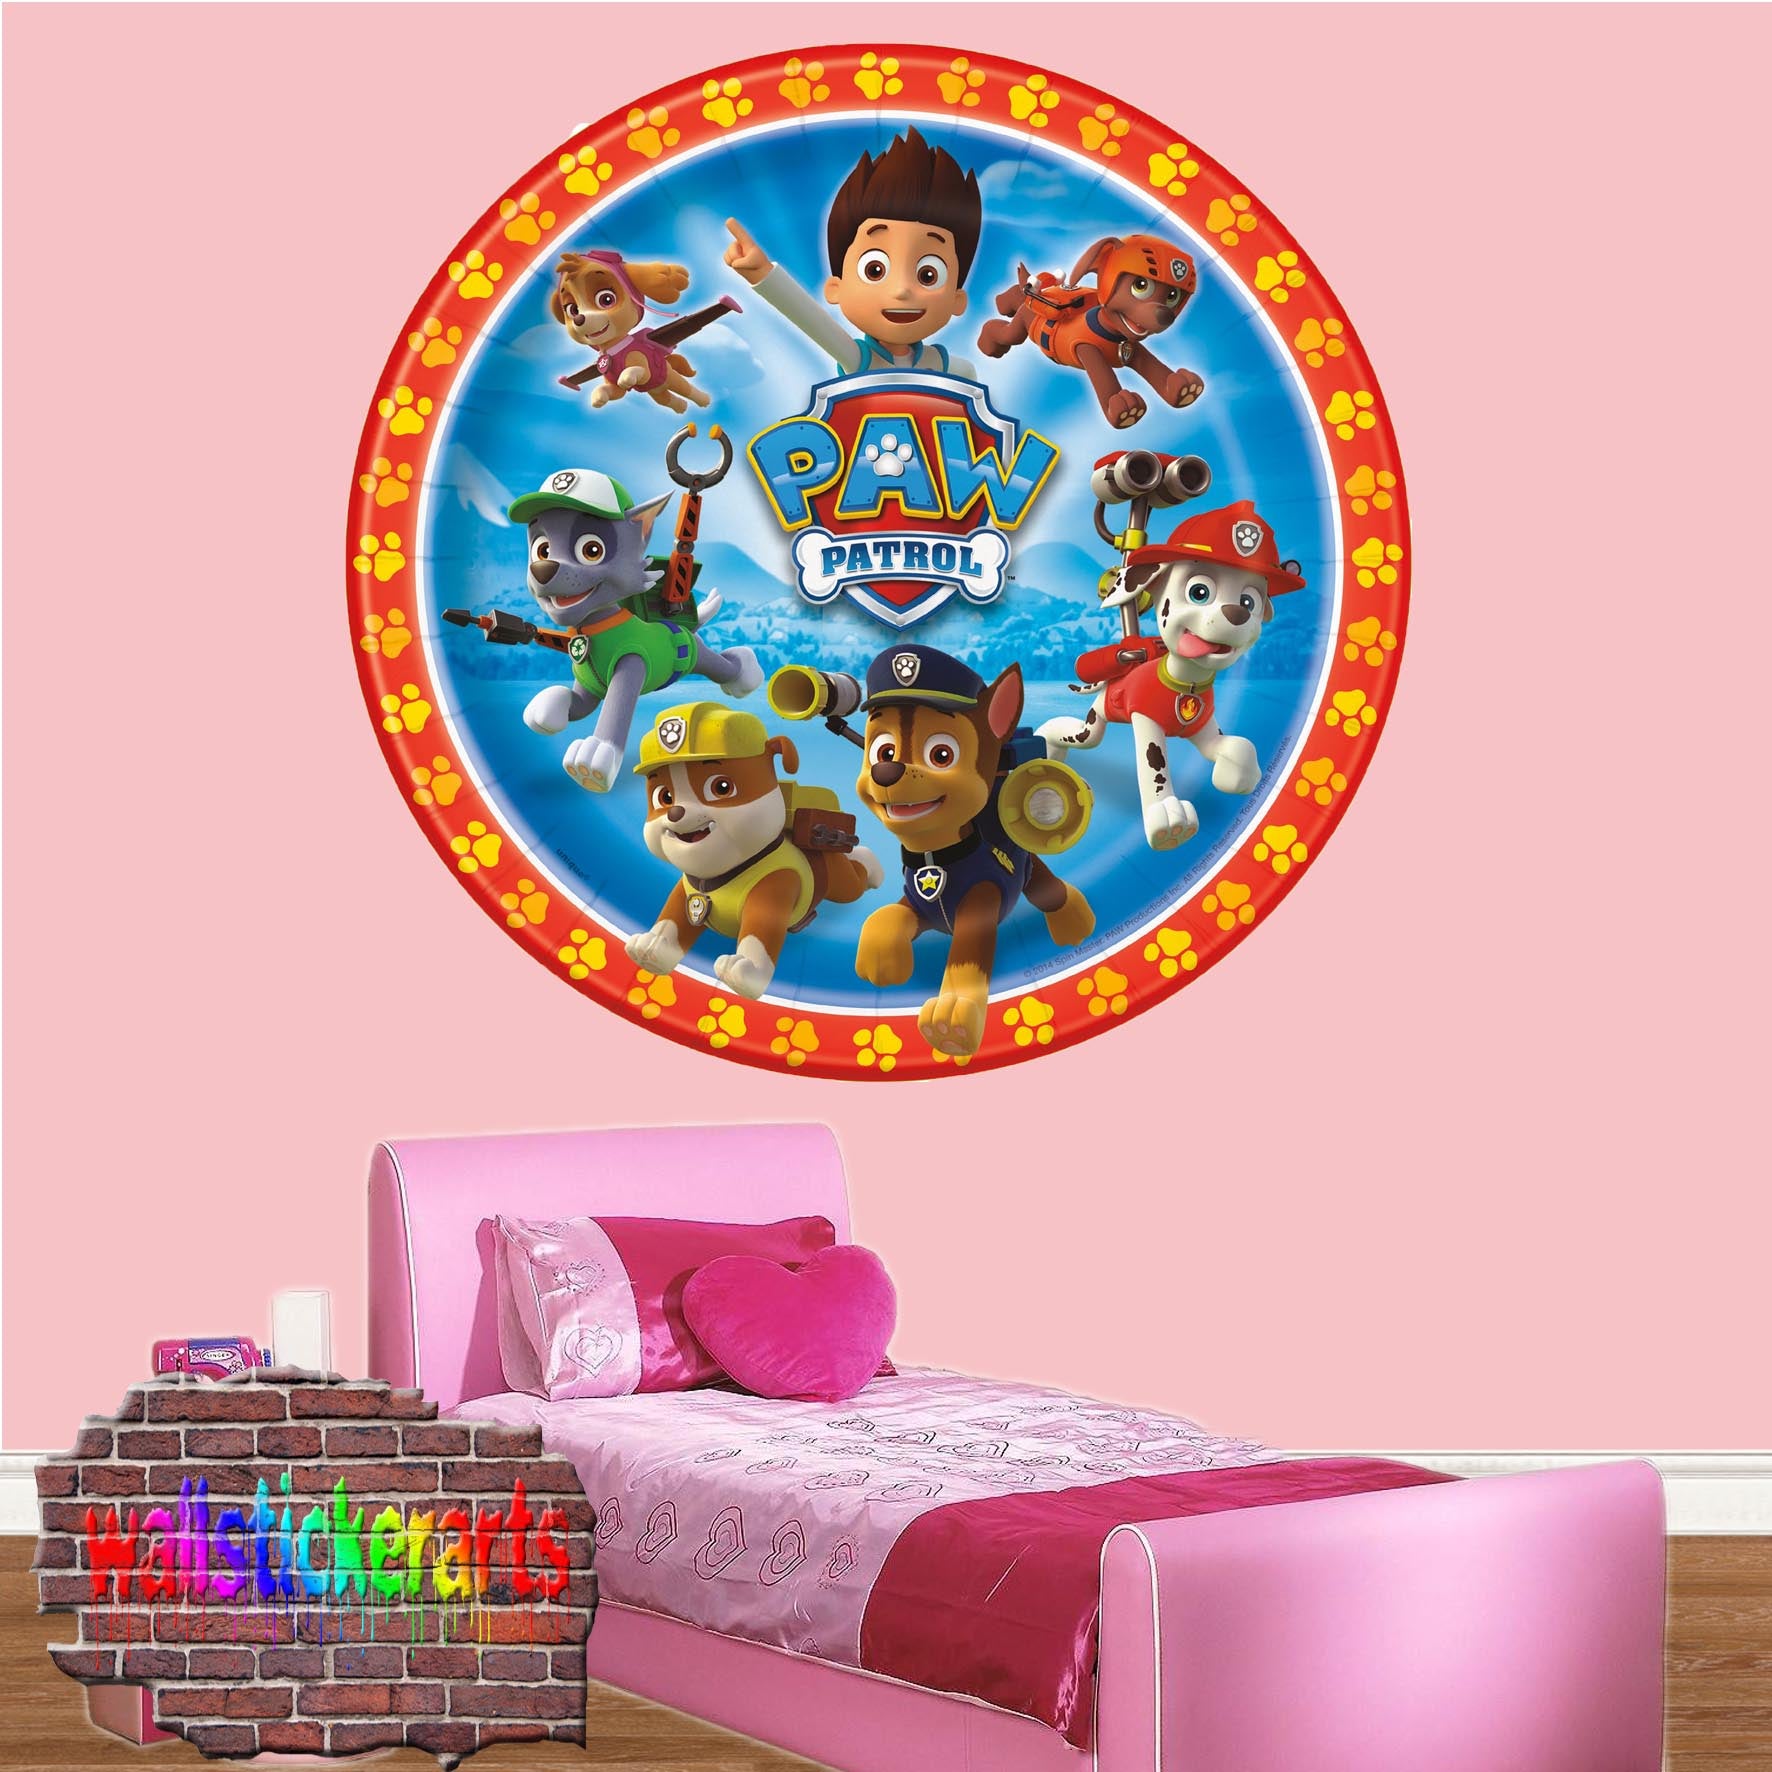 PAW PATROL LOGO WALL STICKER MURAL POSTER MURAL DECAL